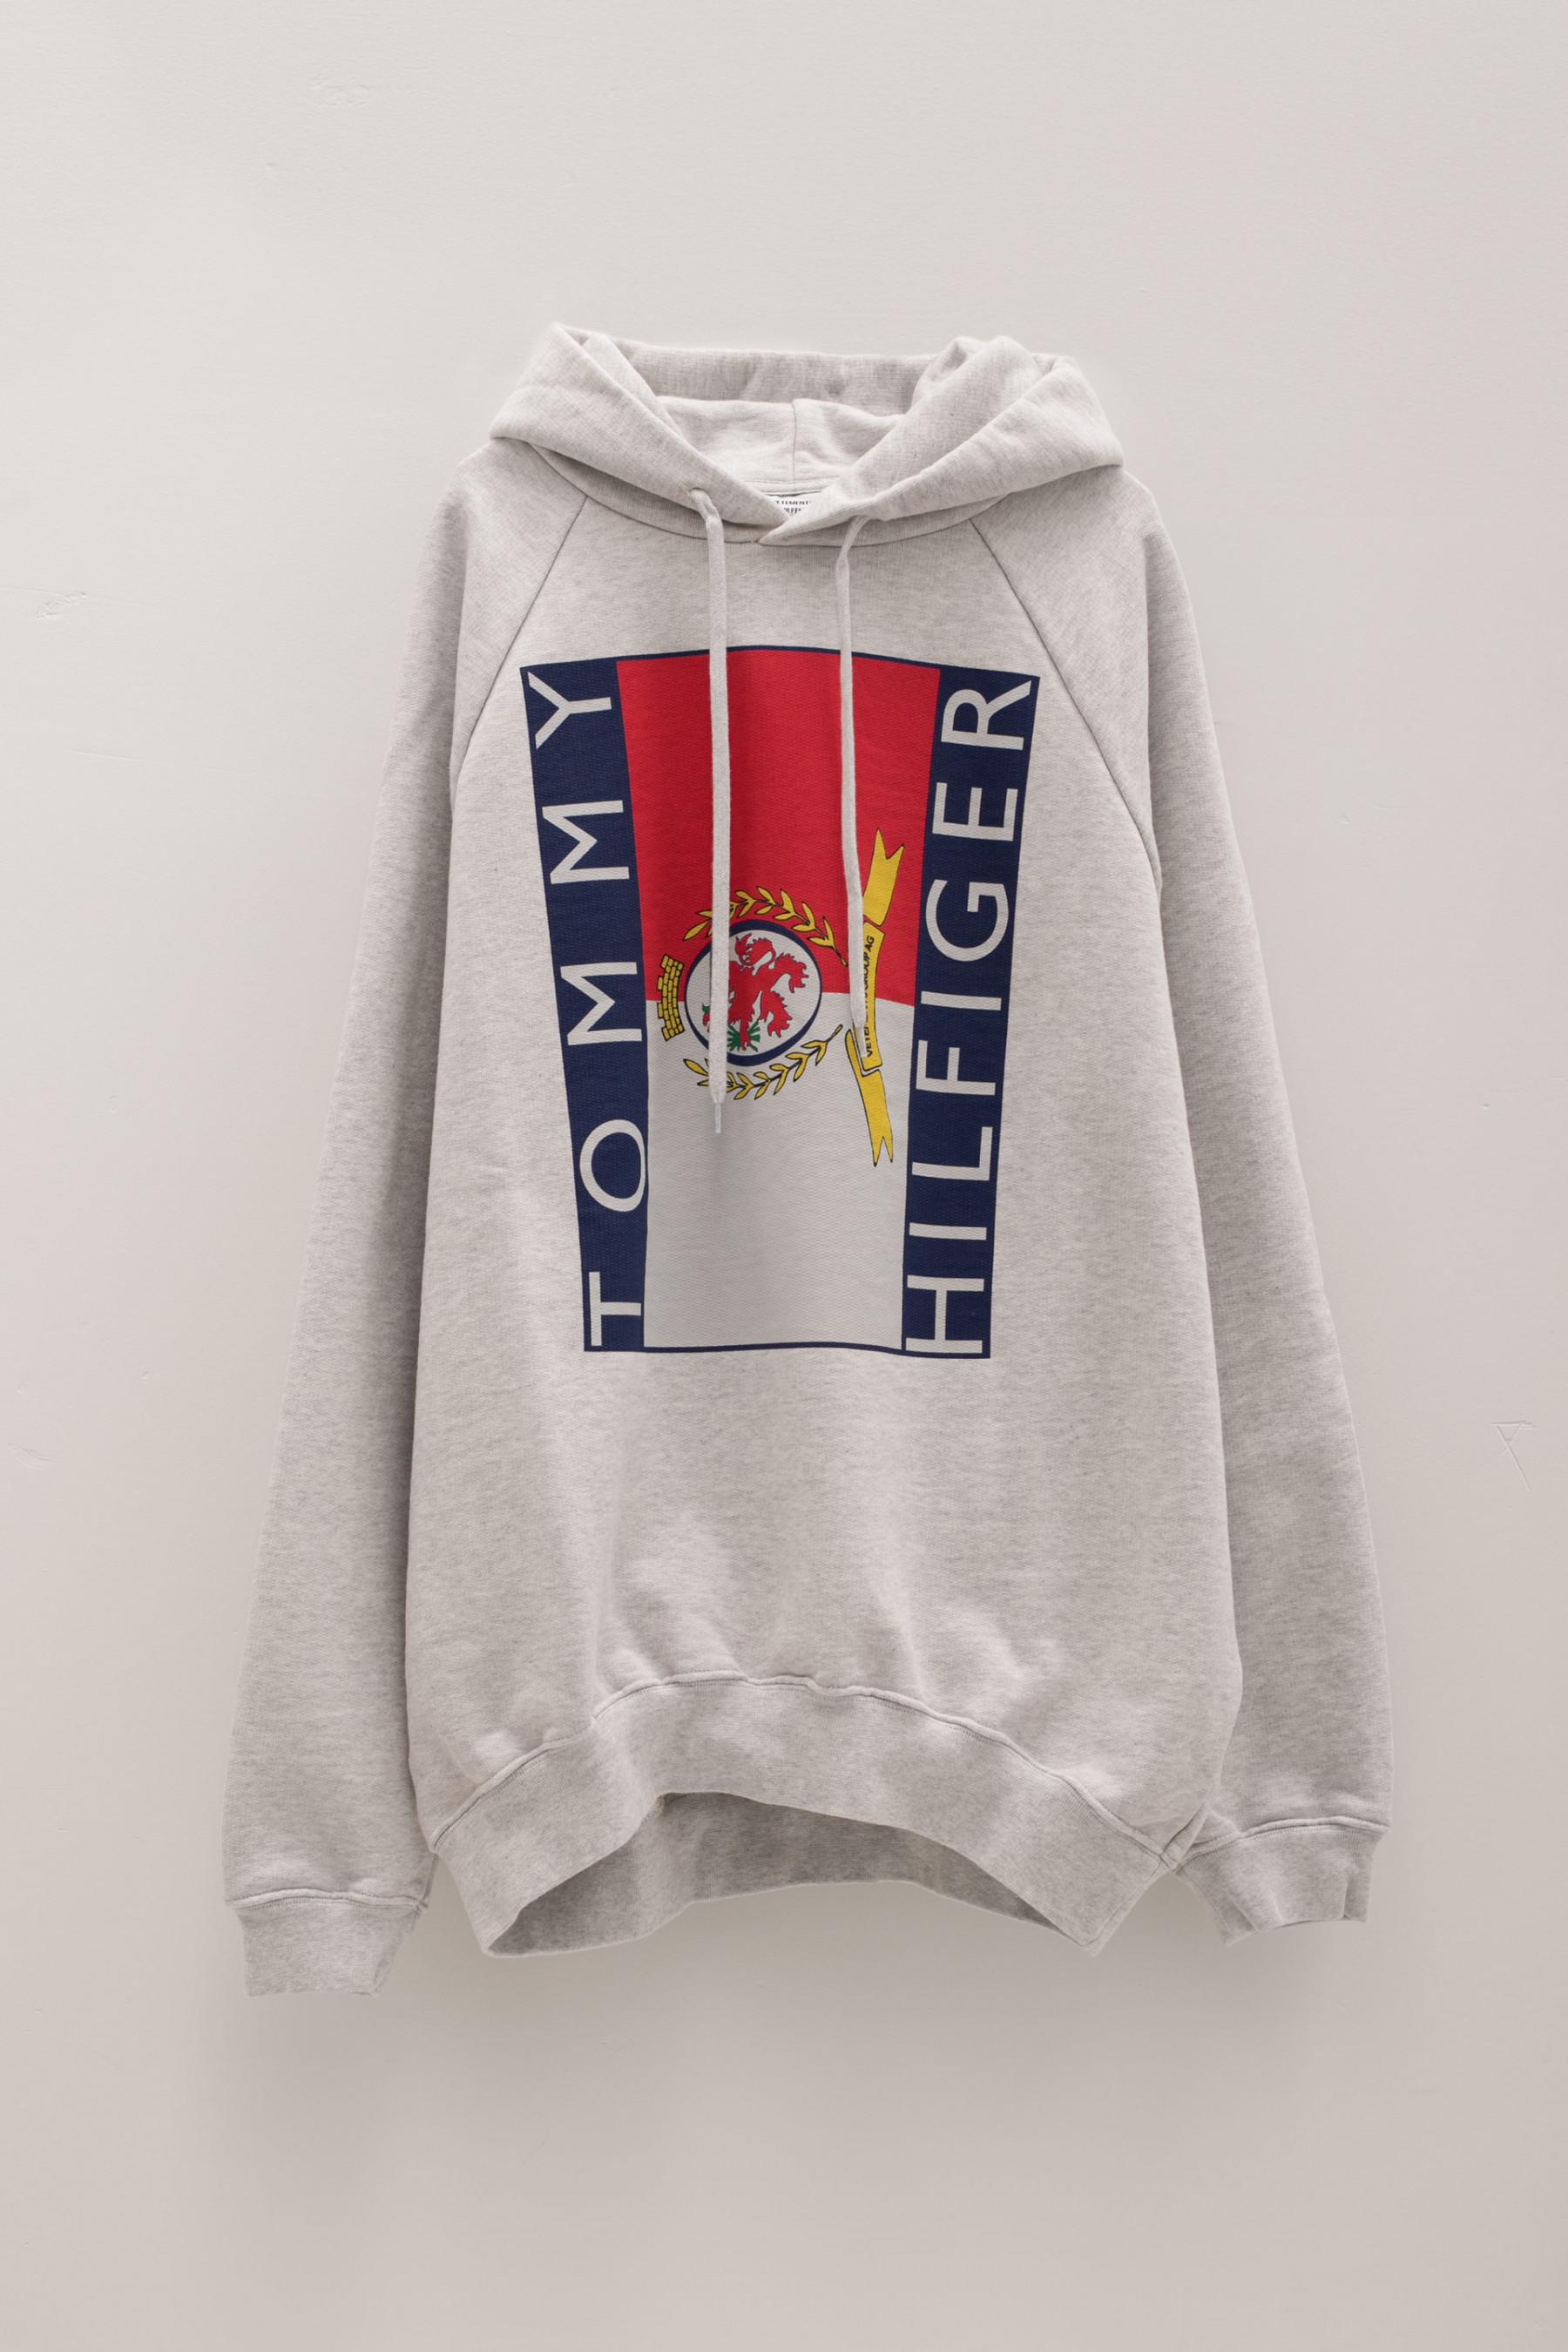 Vetements X Tommy Hilfiger Oversized Hoodie Hot Sale, UP TO 51% OFF |  www.bodegasflorido.com